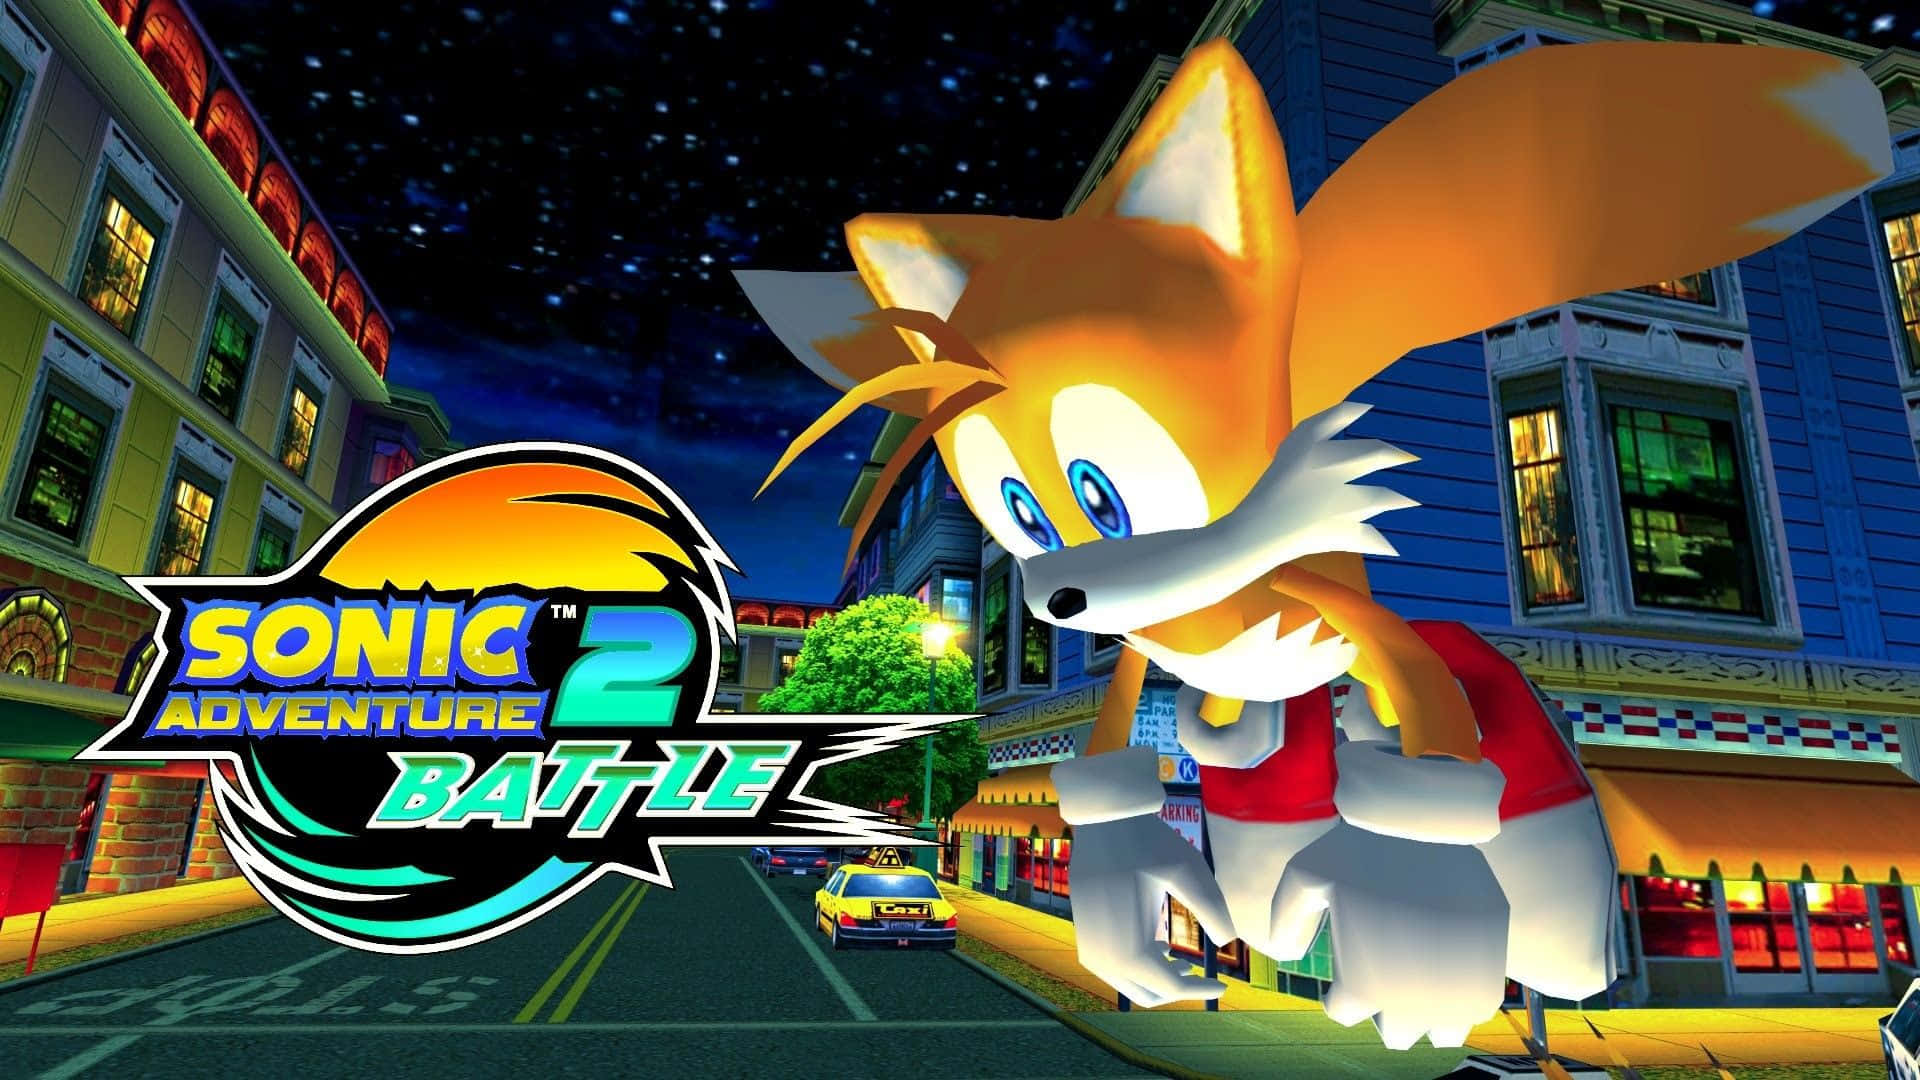 Sonic the Hedgehog and Miles "Tails" Prower Take Flight in Sonic 2